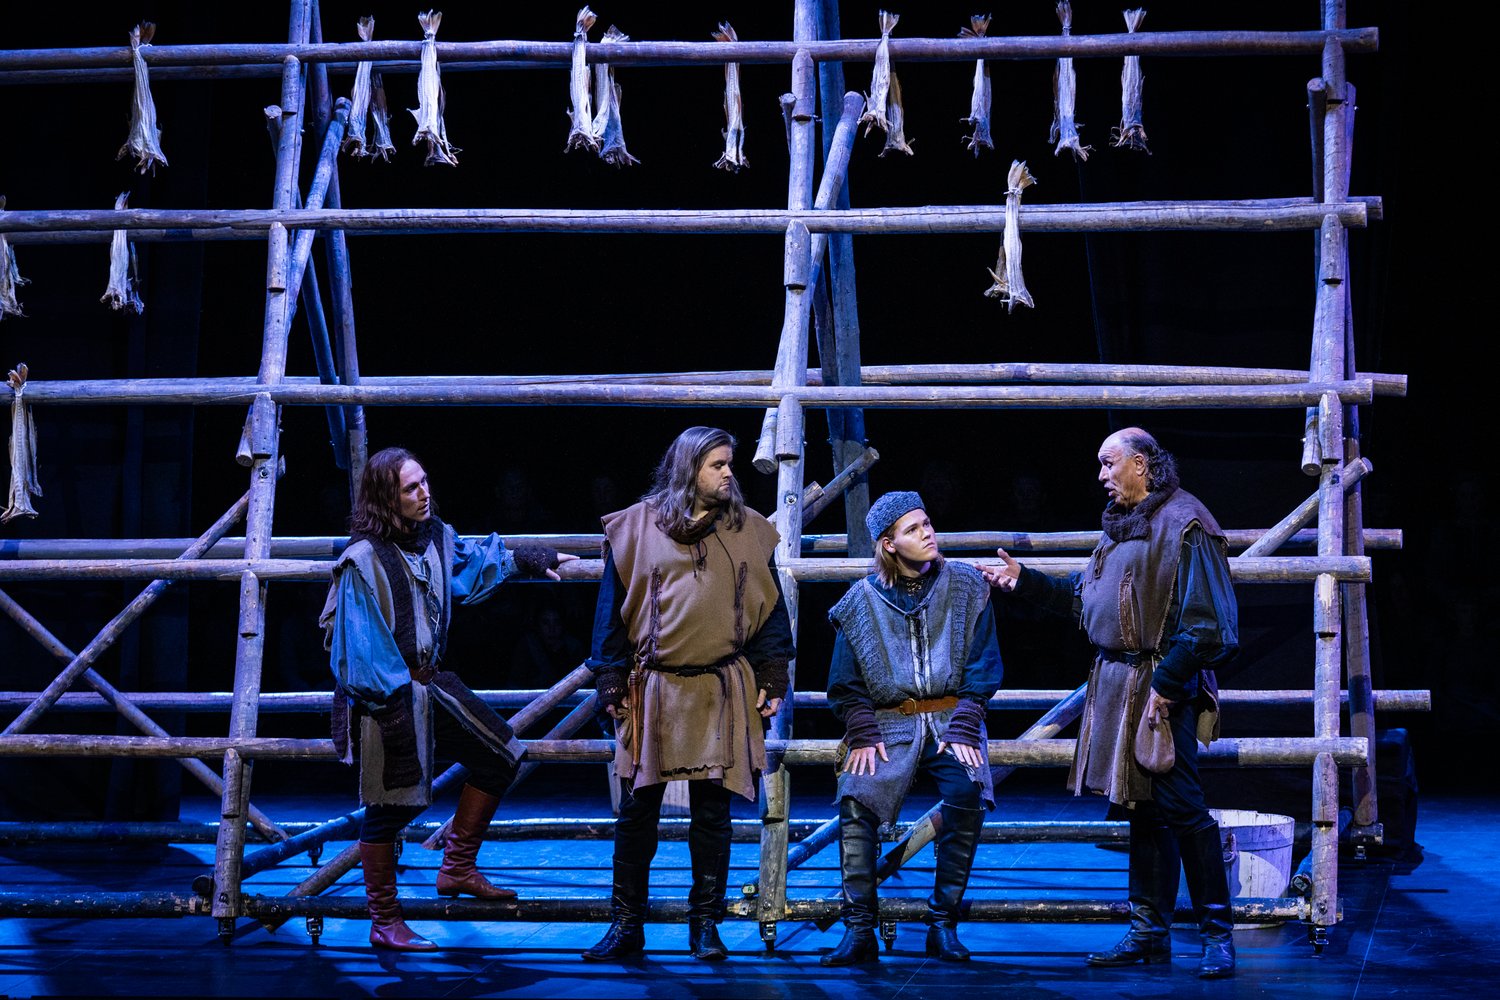 The opera about dried fish from Røst and Querini from Venice. Photo: Vidar Thorbjornsen / The Arctic Philharmonic